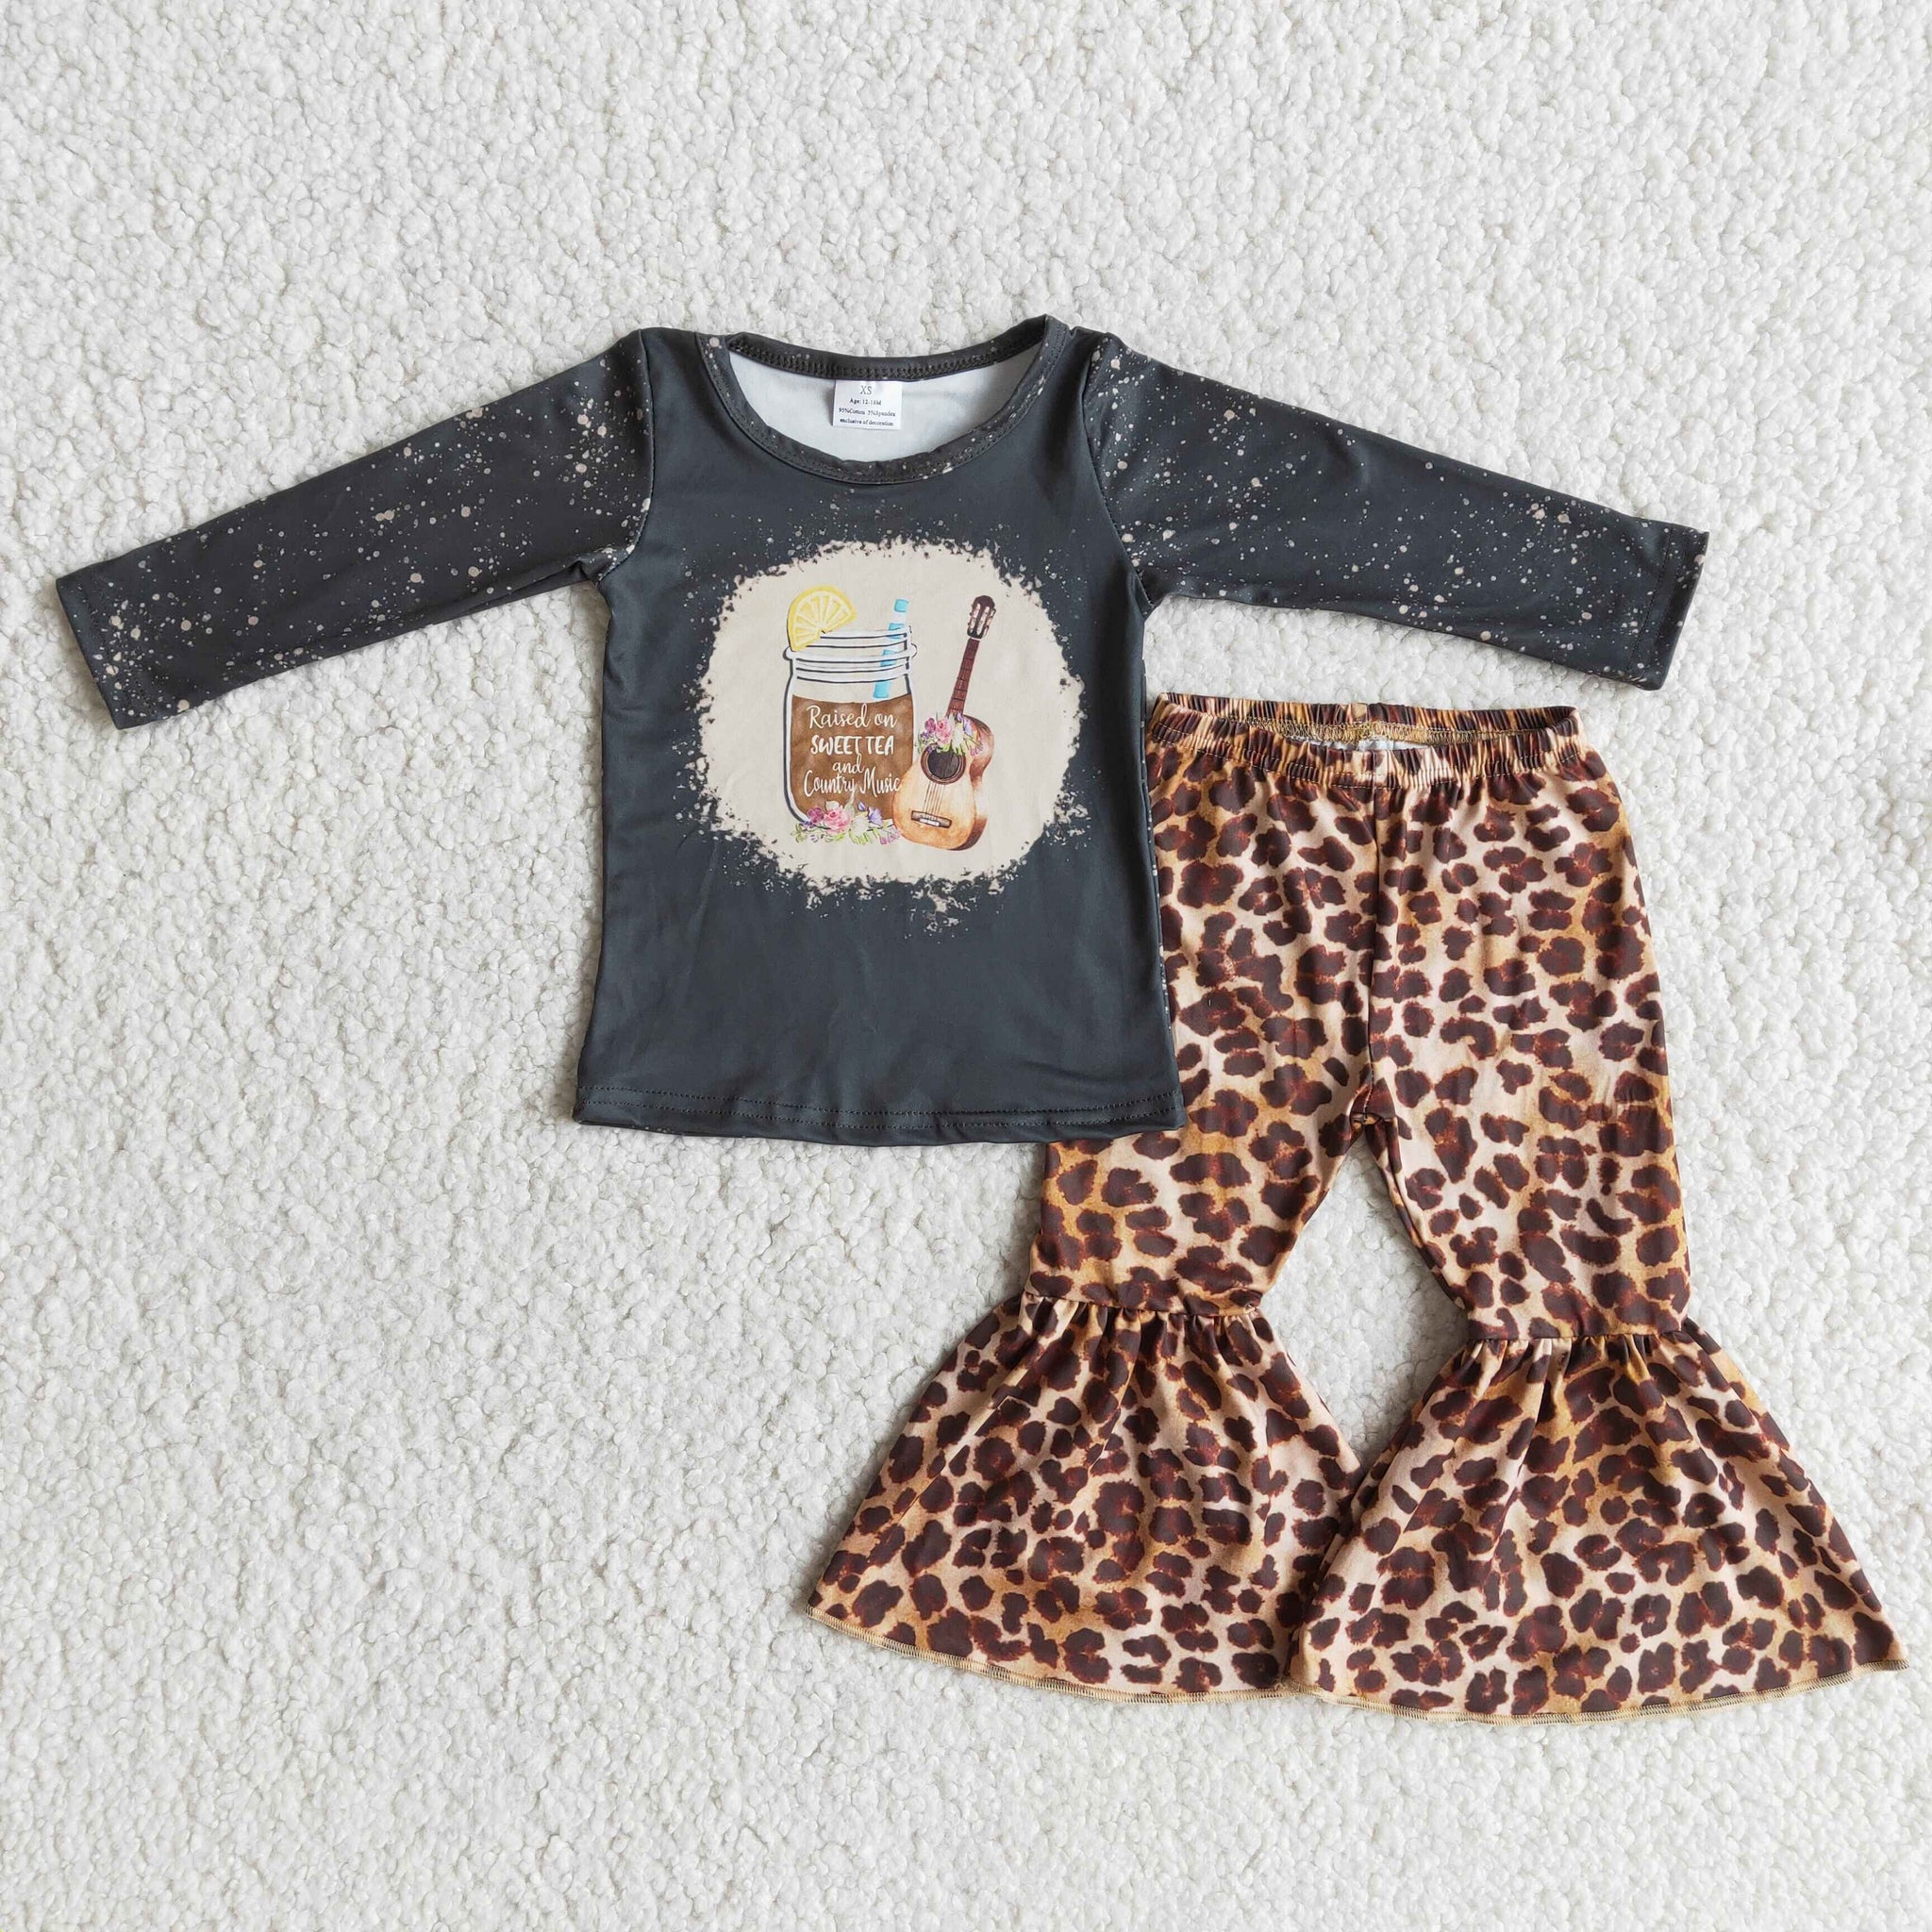 Boutique Clothing Guitar Long Sleeve Tops Leopard Print Flared Pants Girls Kids Clothes